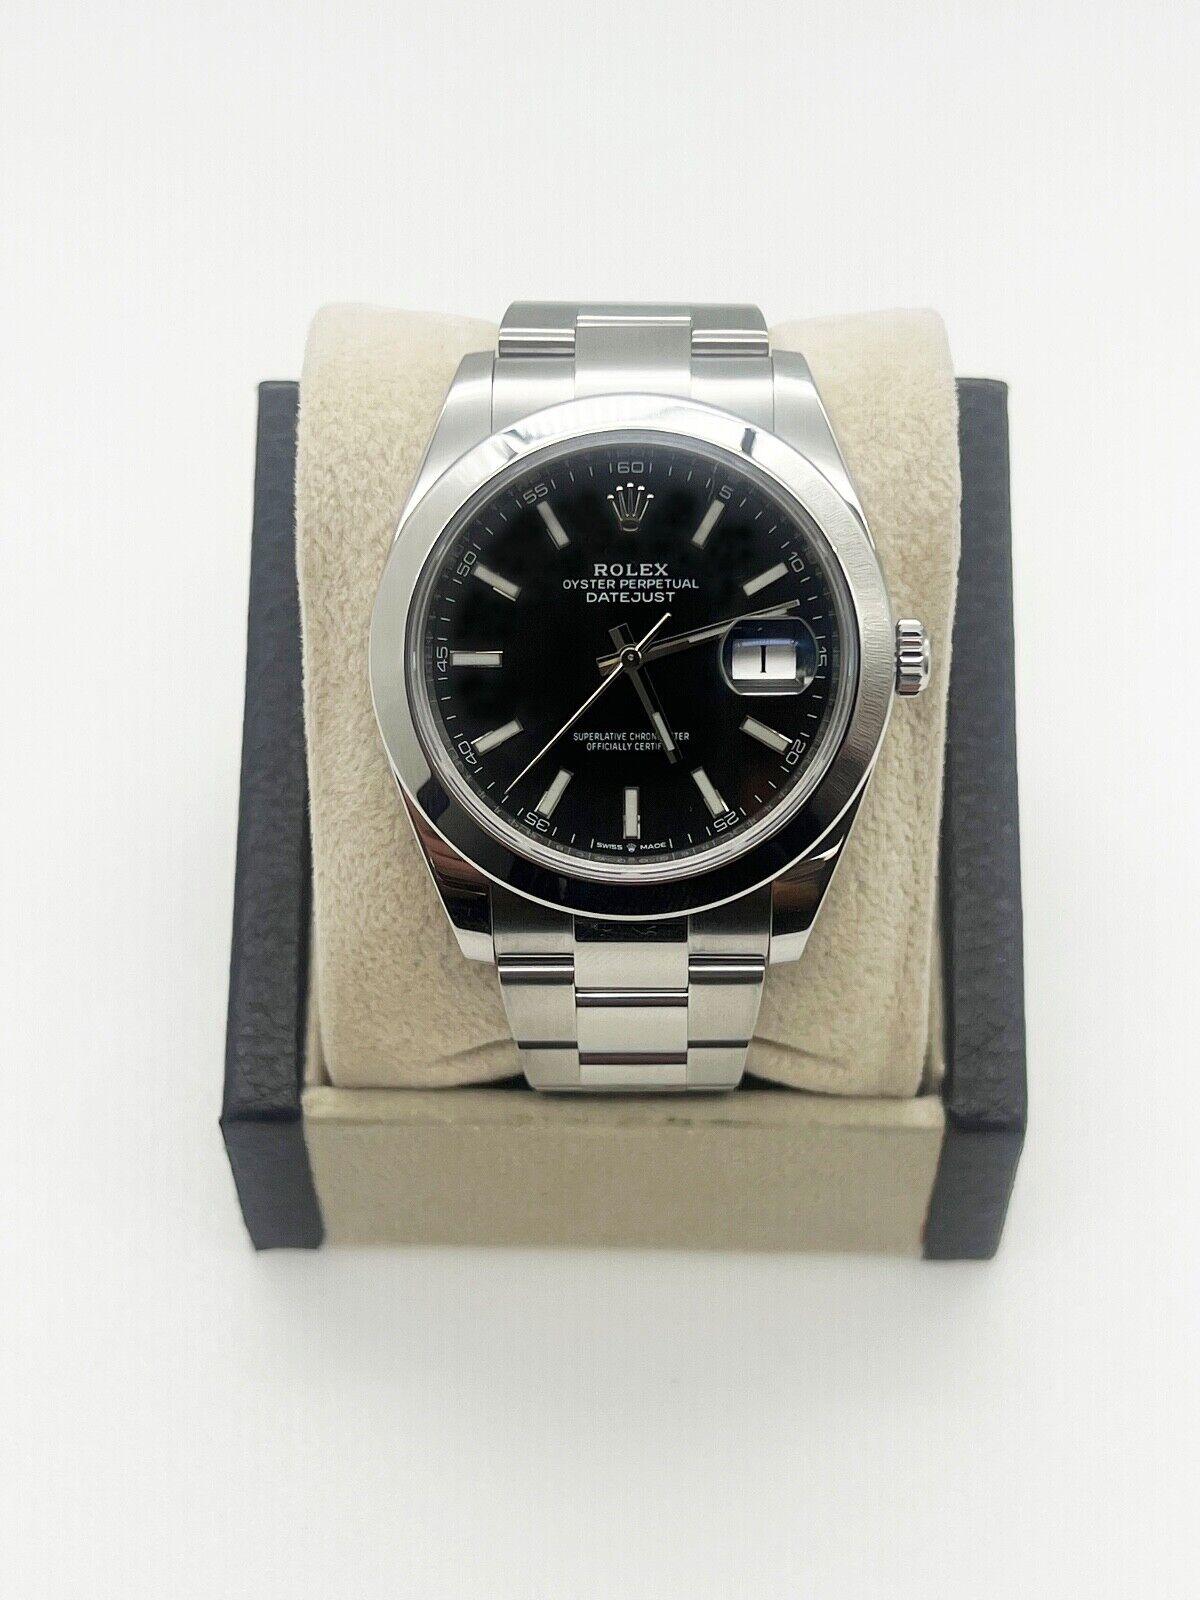 Rolex 126300 Datejust 41 Black Dial Stainless Steel Box Paper In Excellent Condition For Sale In San Diego, CA